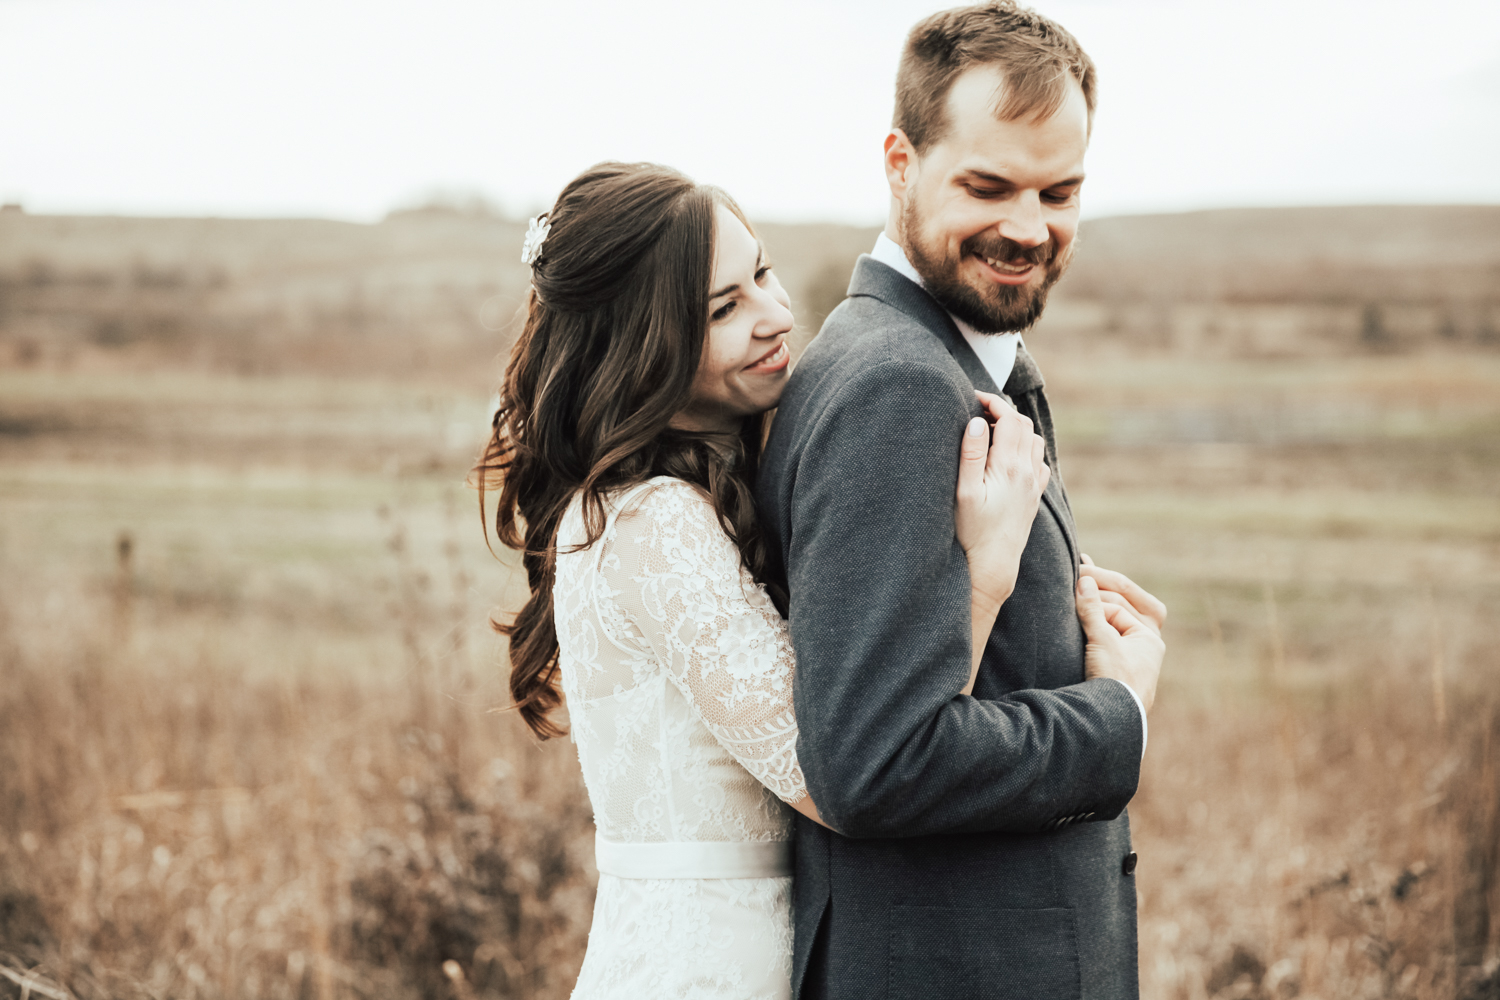 Samantha+Dan: The Byron Colby Barn Grayslake, IL - Oh So Lovely Photography